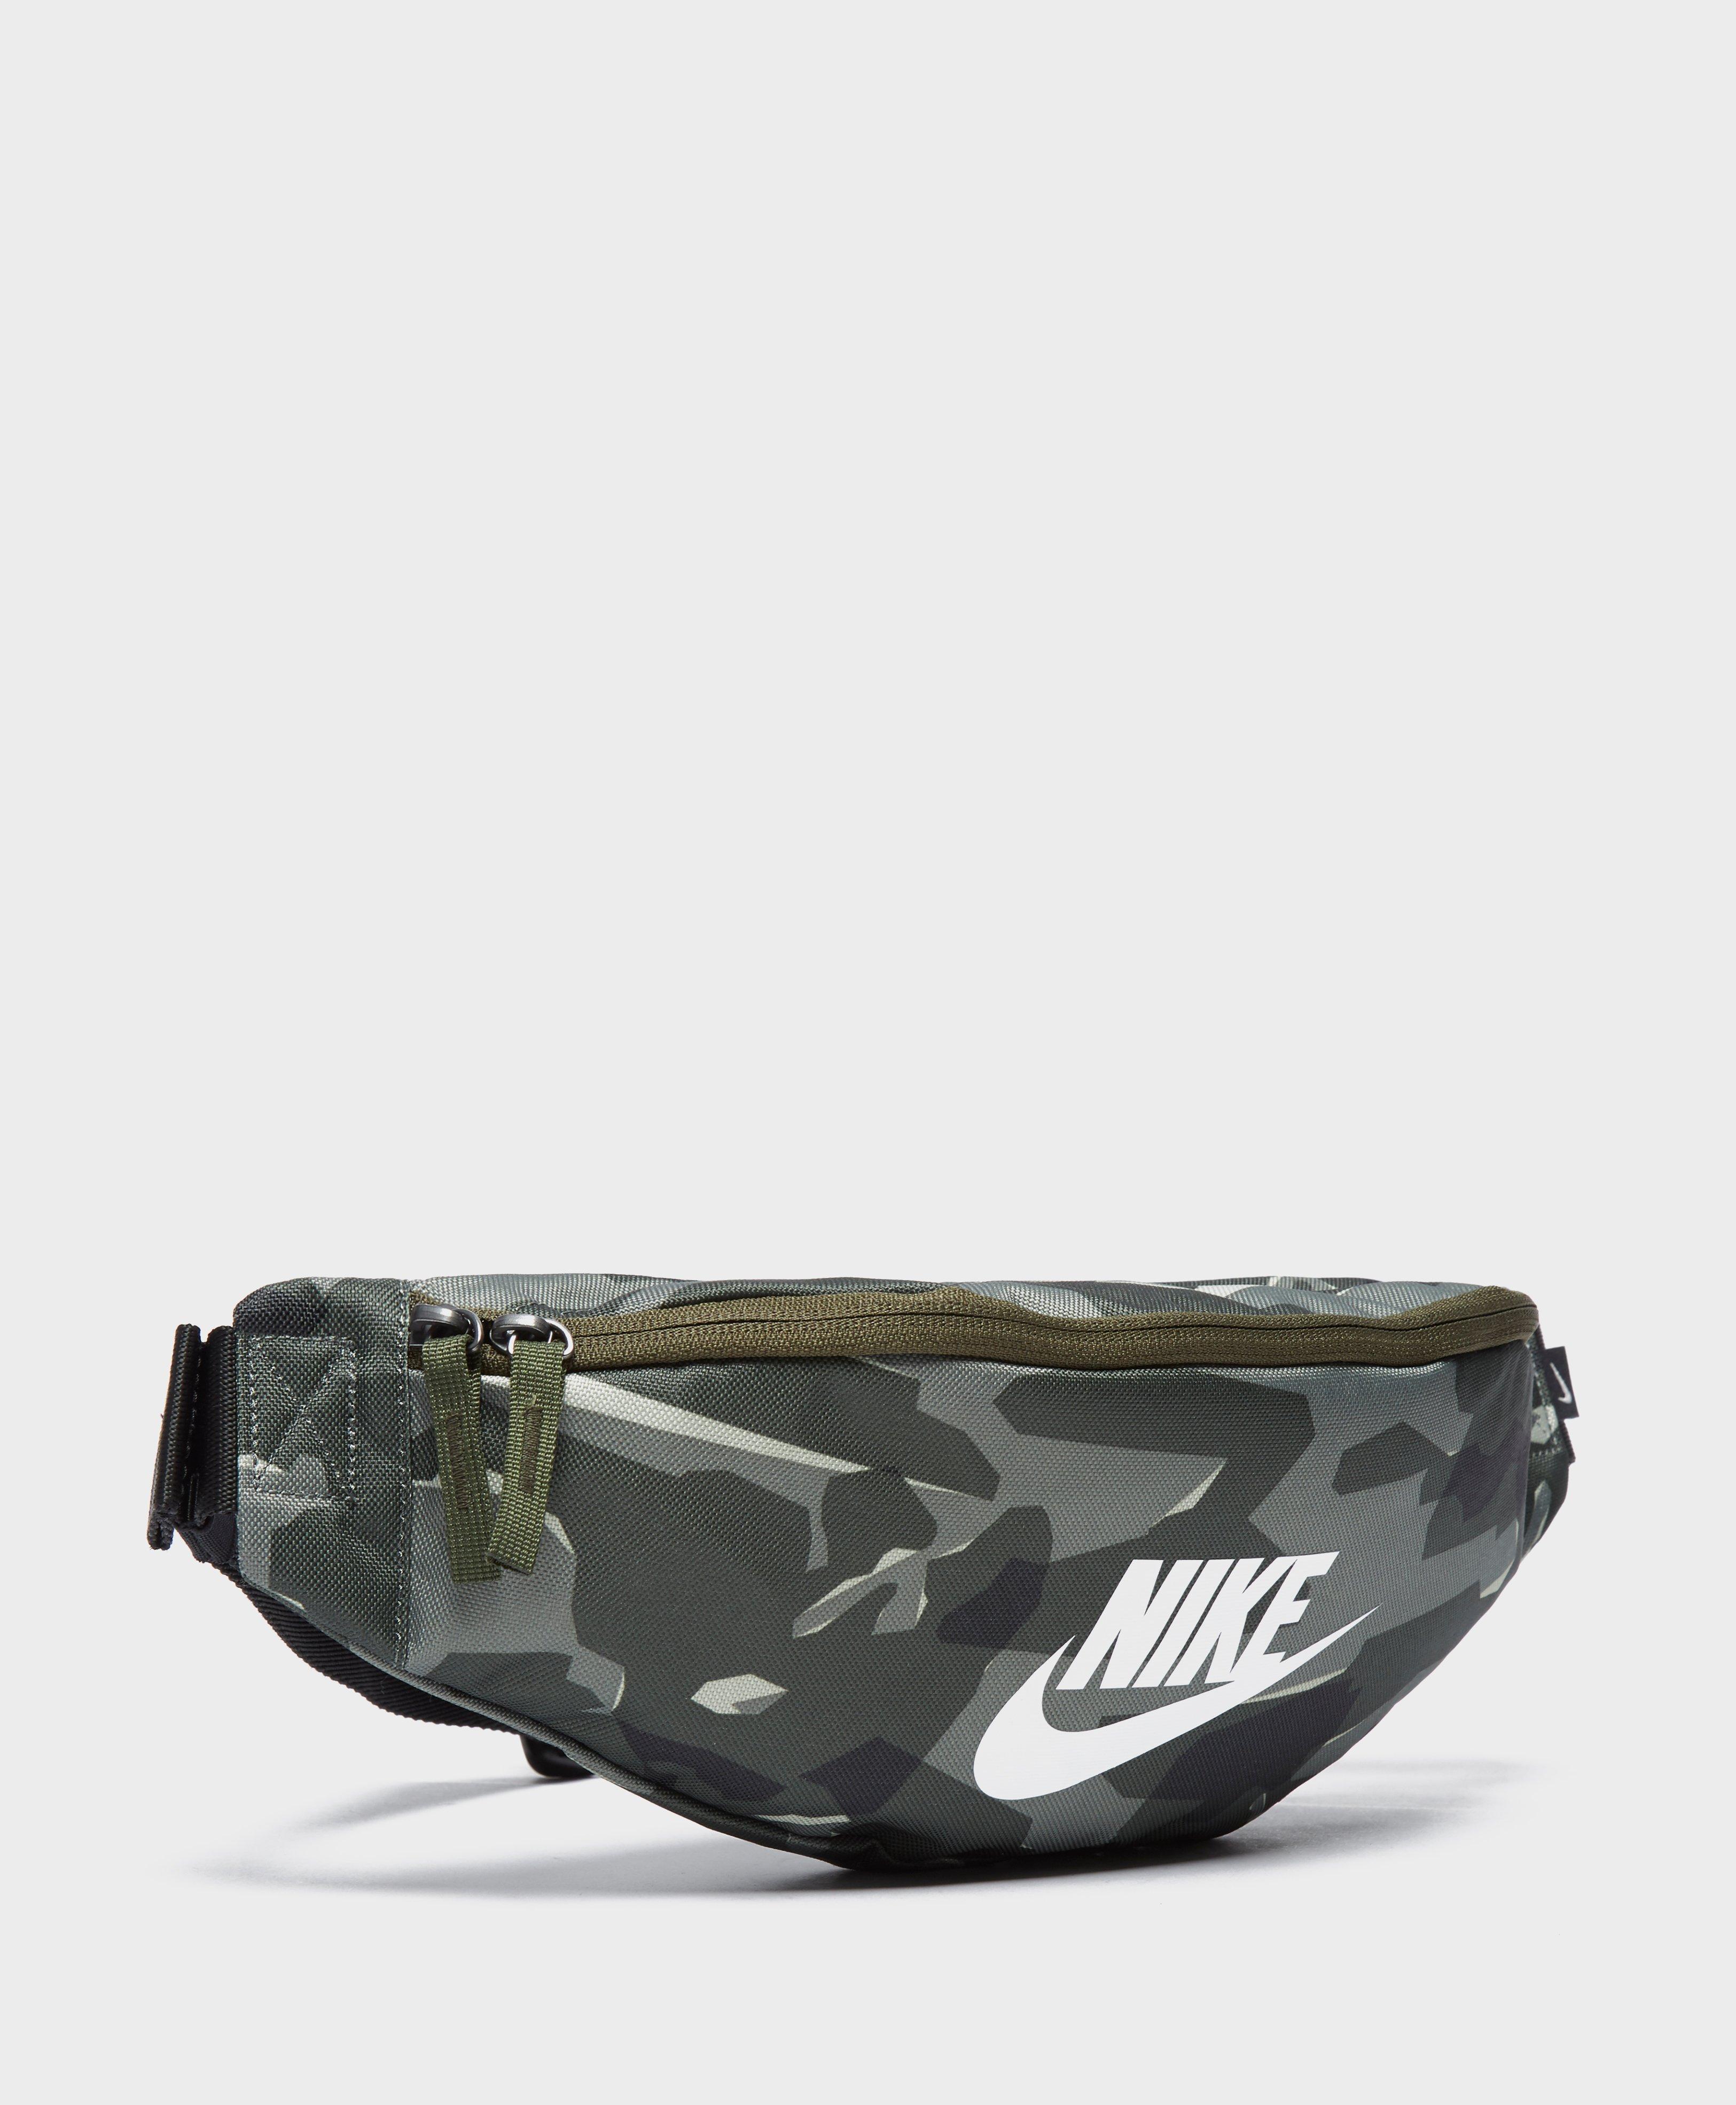 Nike Synthetic Camo Bum Bag for Men - Lyst